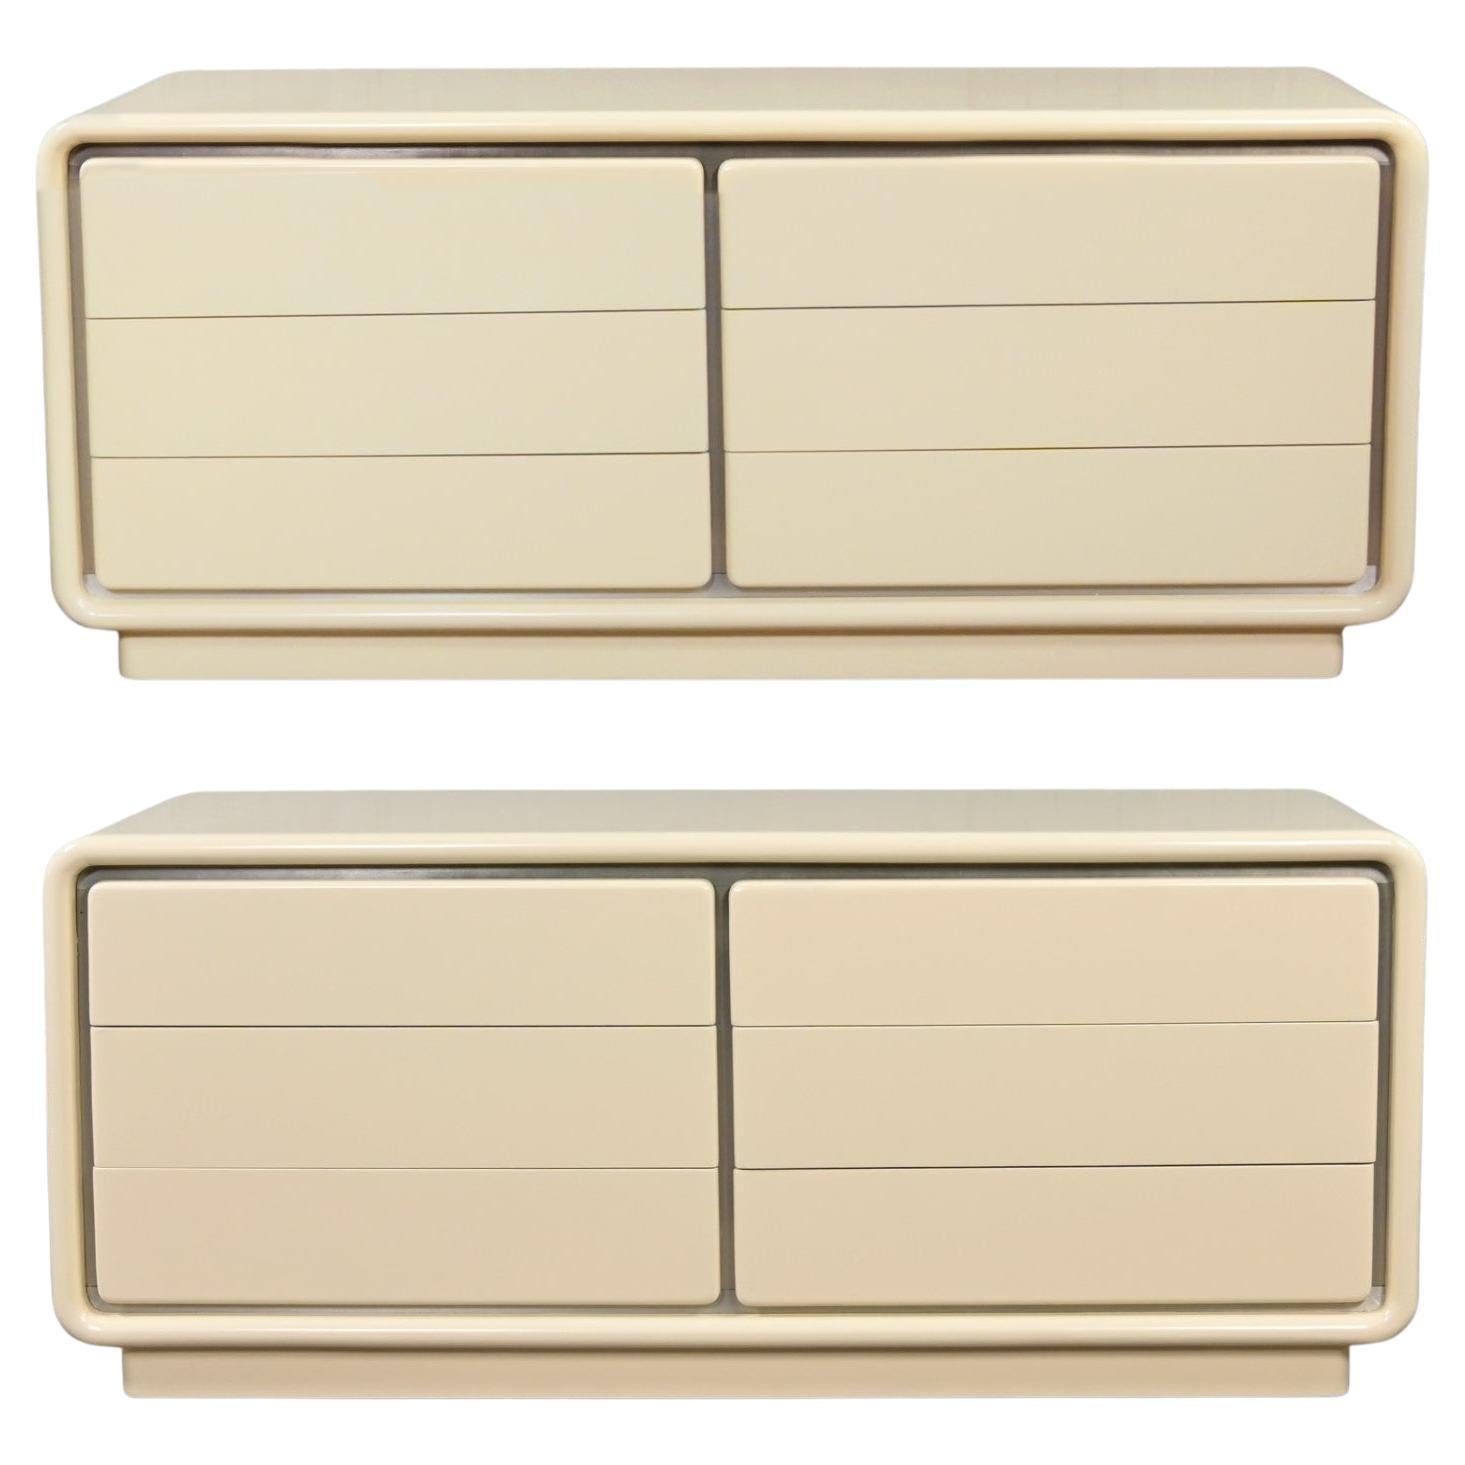 Modern Glenn of California Dressers or Credenzas Off White Lacquer a Pair